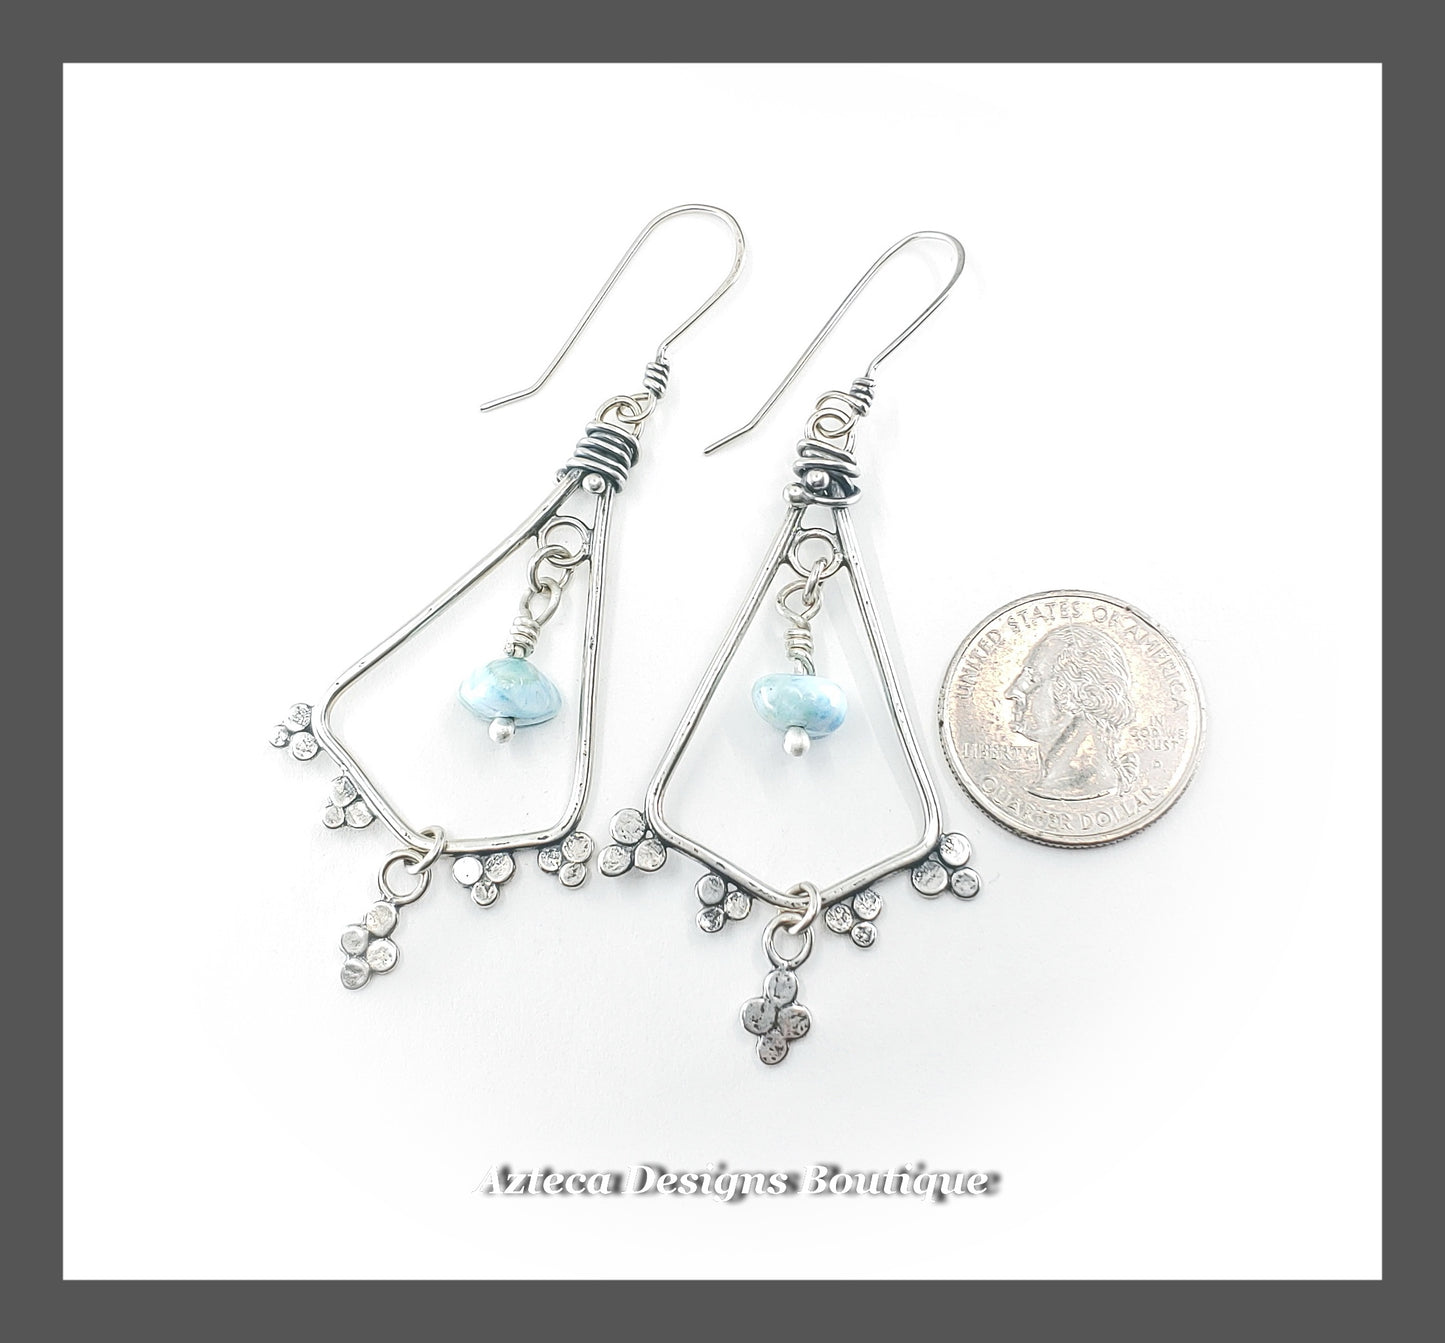 Hand Fabricated Argentium Silver Earrings + Larimar Lace